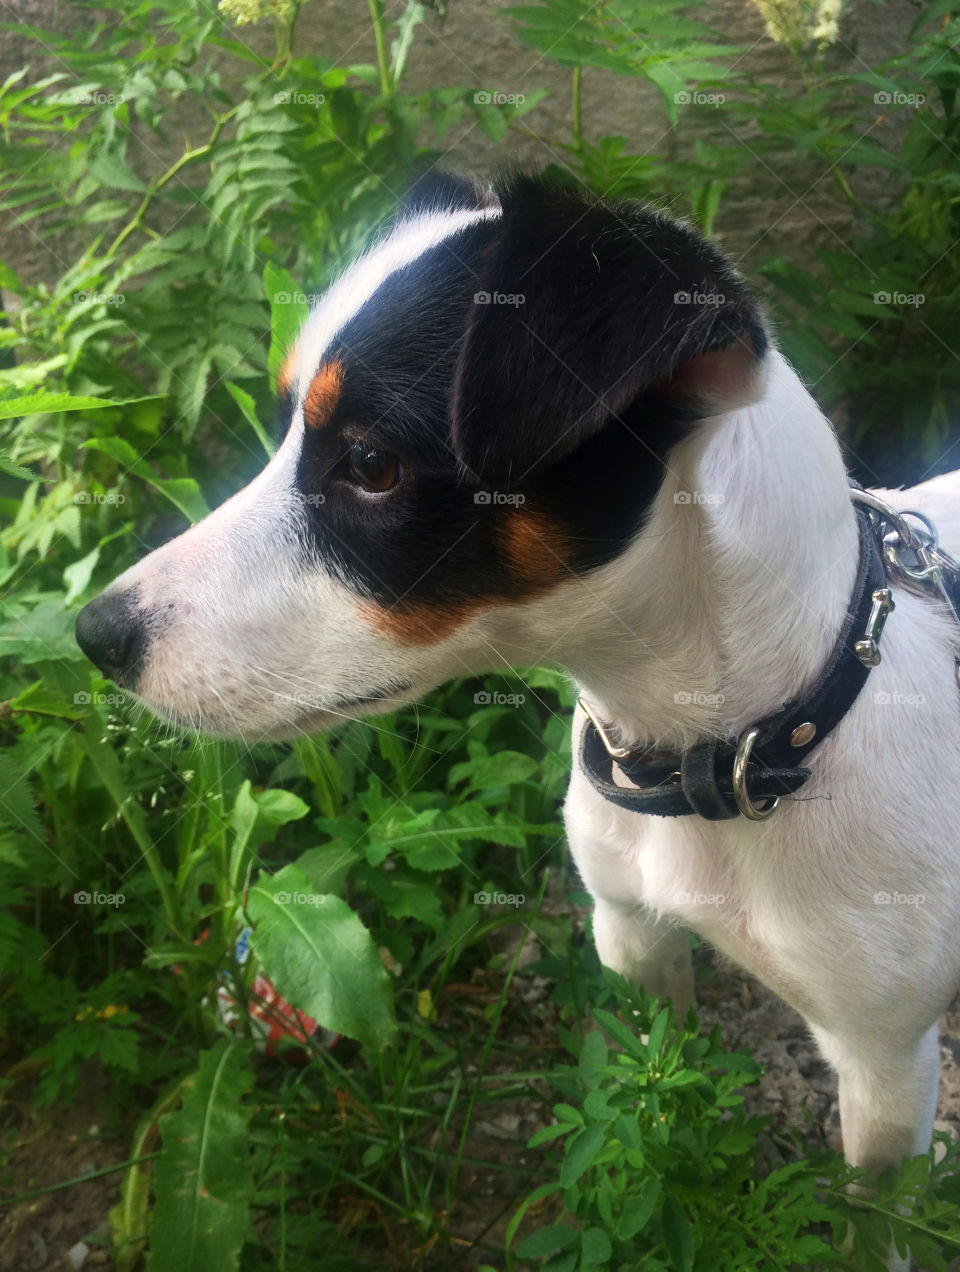 Closeup on face of jack Russell terrier puppy exploring on a walk outdoors in summer with curious and alert look on face conceptual animal body language photography 